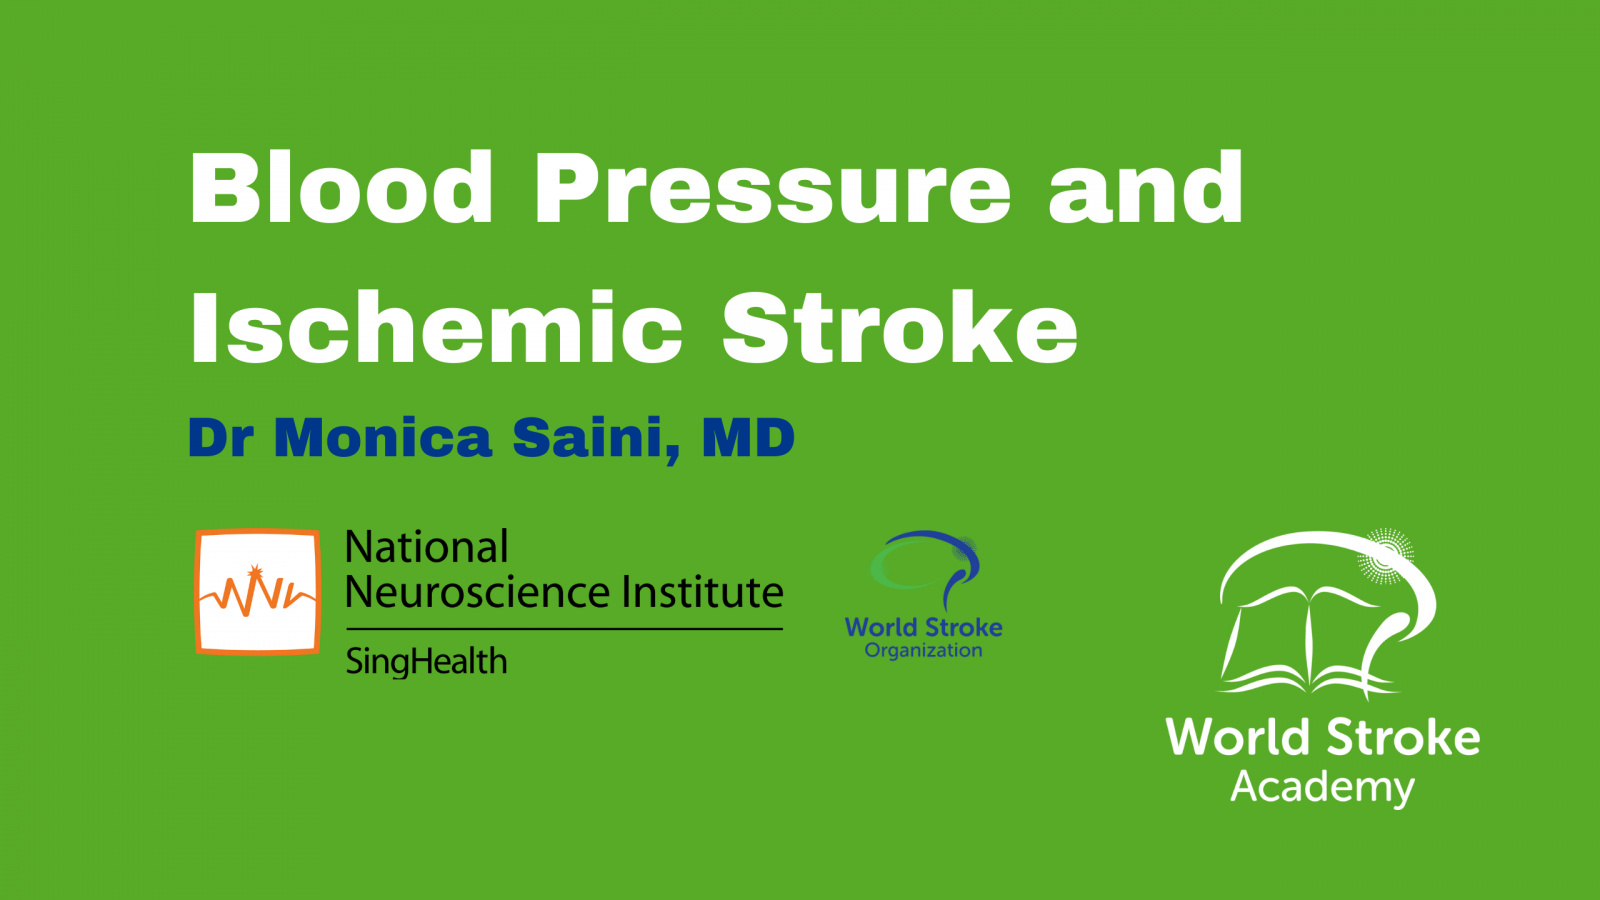 Case Study – Blood Pressure and Ischemic Stroke